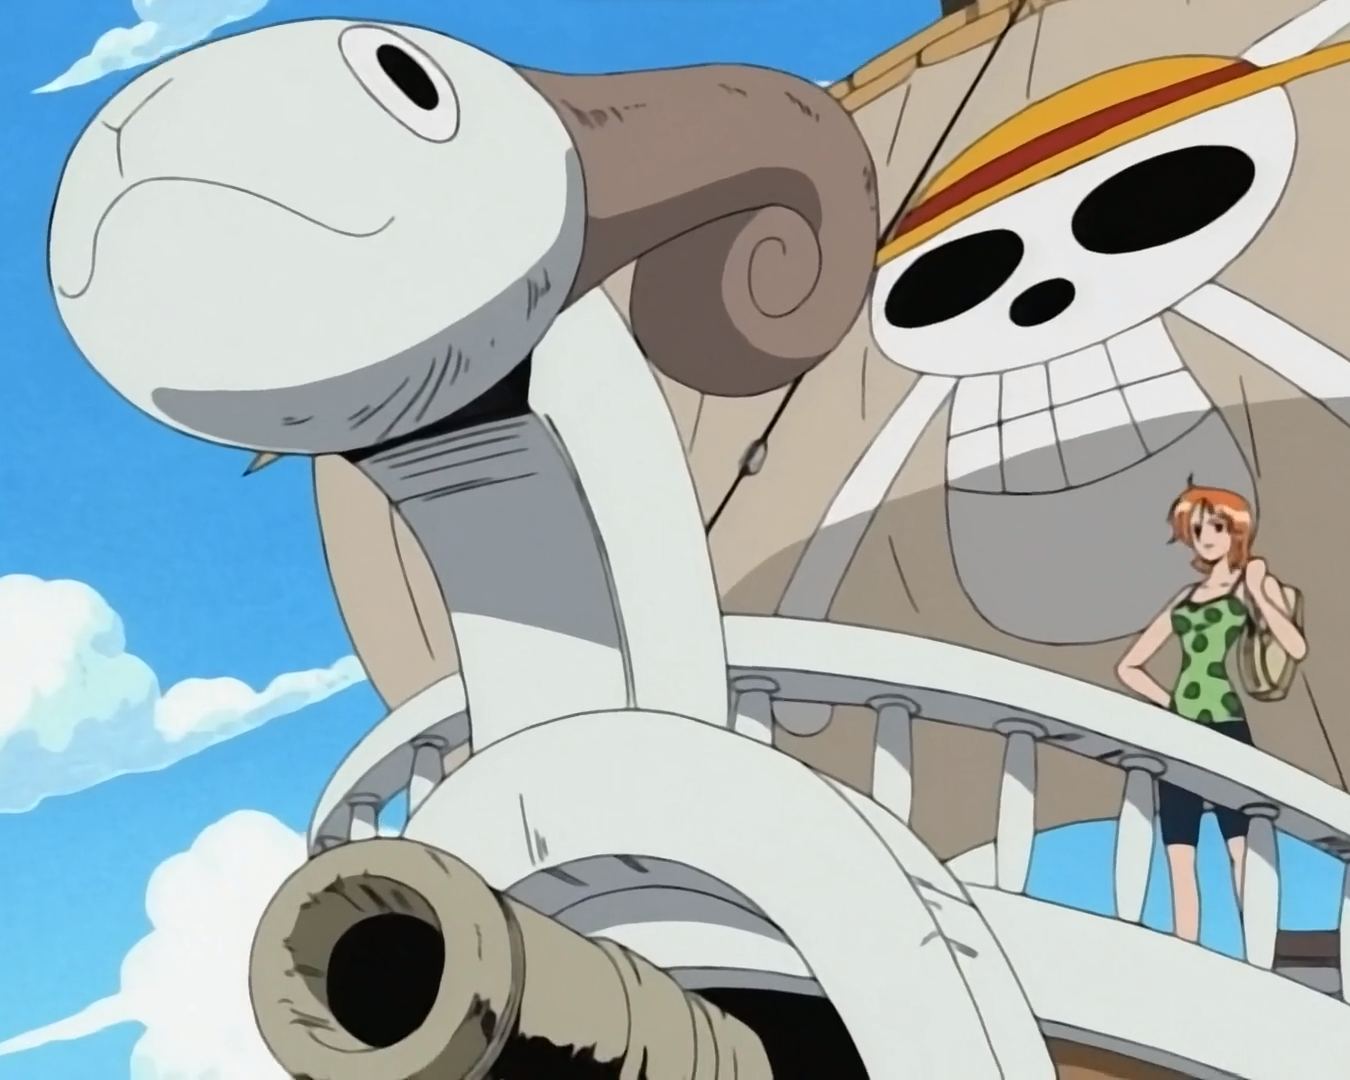 One Piece Nami Steals the Going Merry Go to take it back to Arlong Park